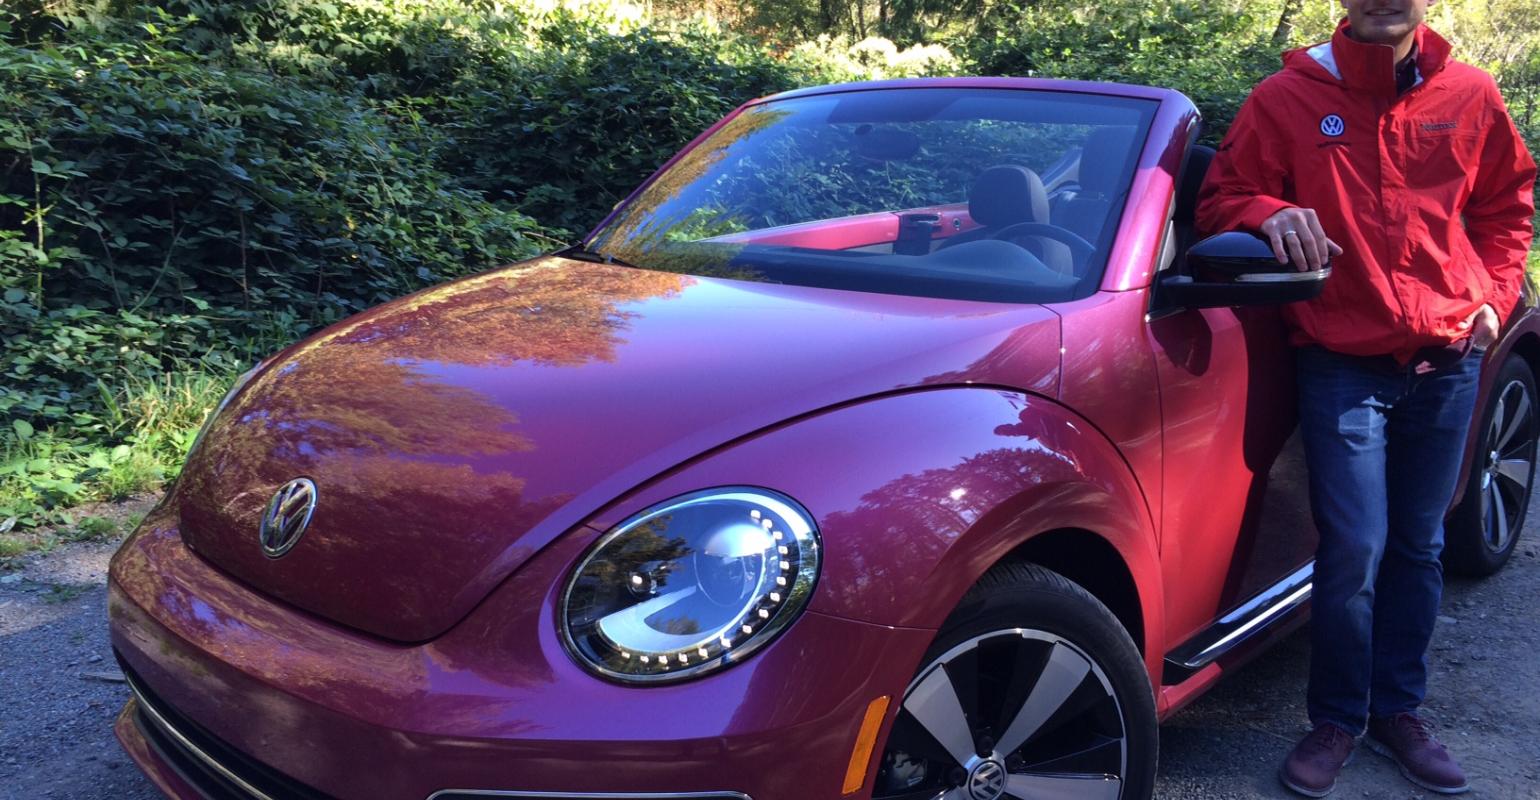 VW Beetle Strives to Stay Young at Age 78 | WardsAuto